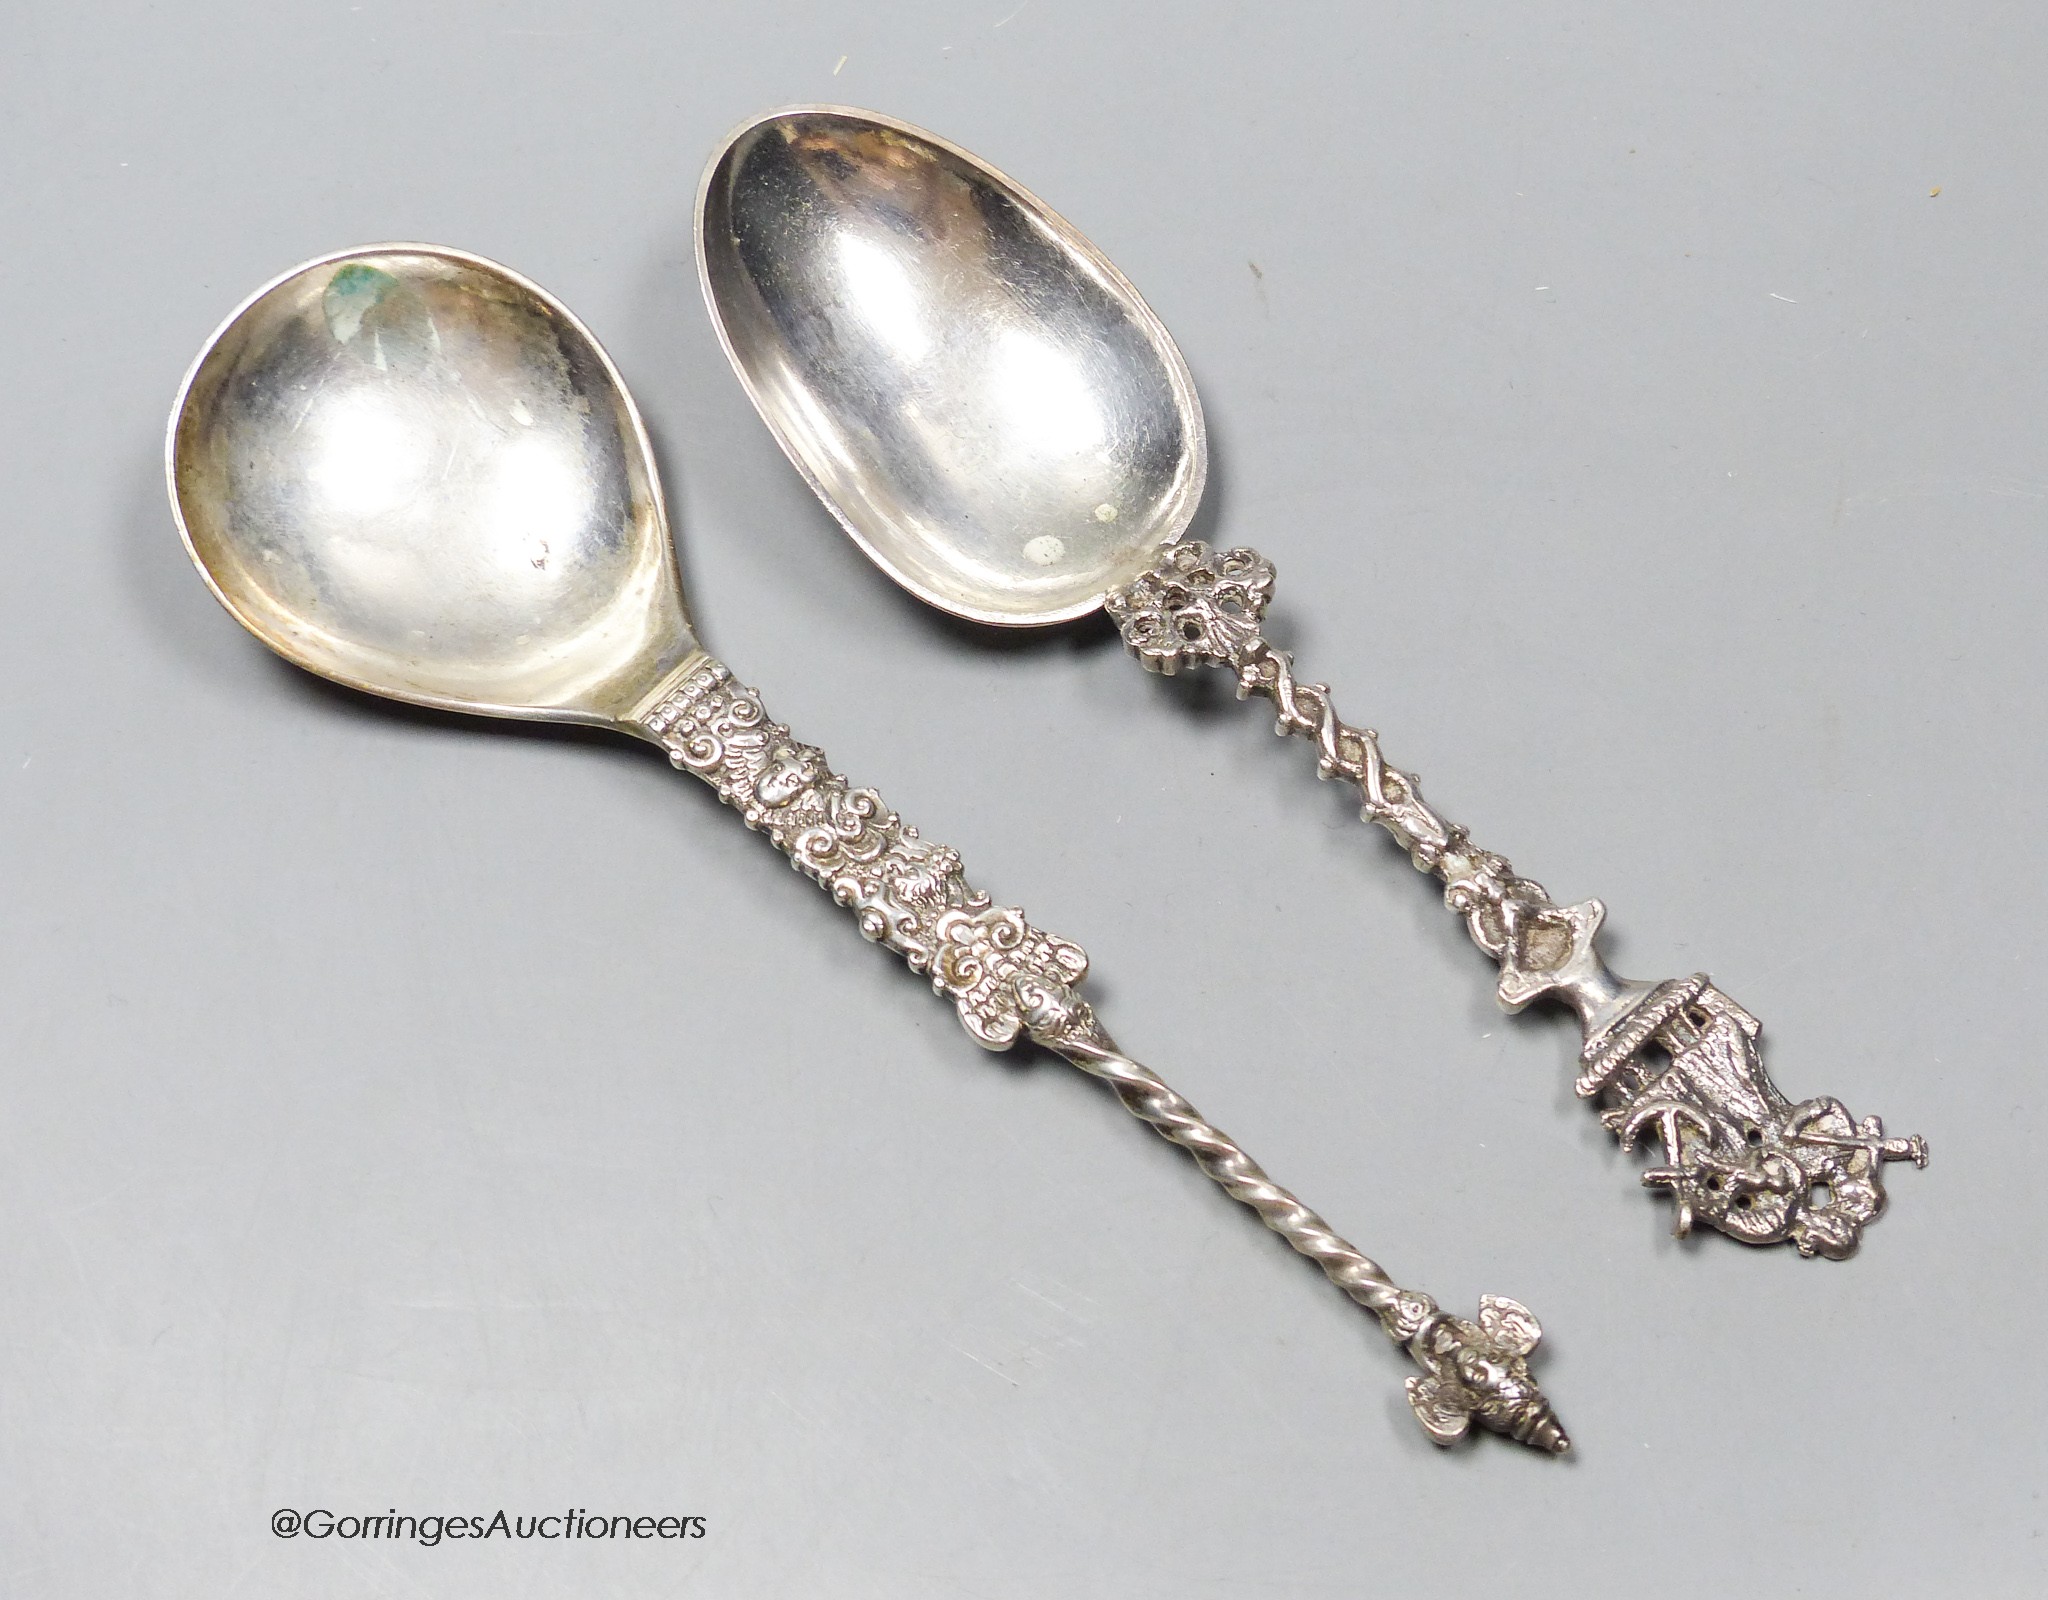 A late 19th century ornate Swedish white metal spoon, with demi-twist handle and mask terminal, 1873, 19.7cm and one other Scandinavian spoon, 123 grams.